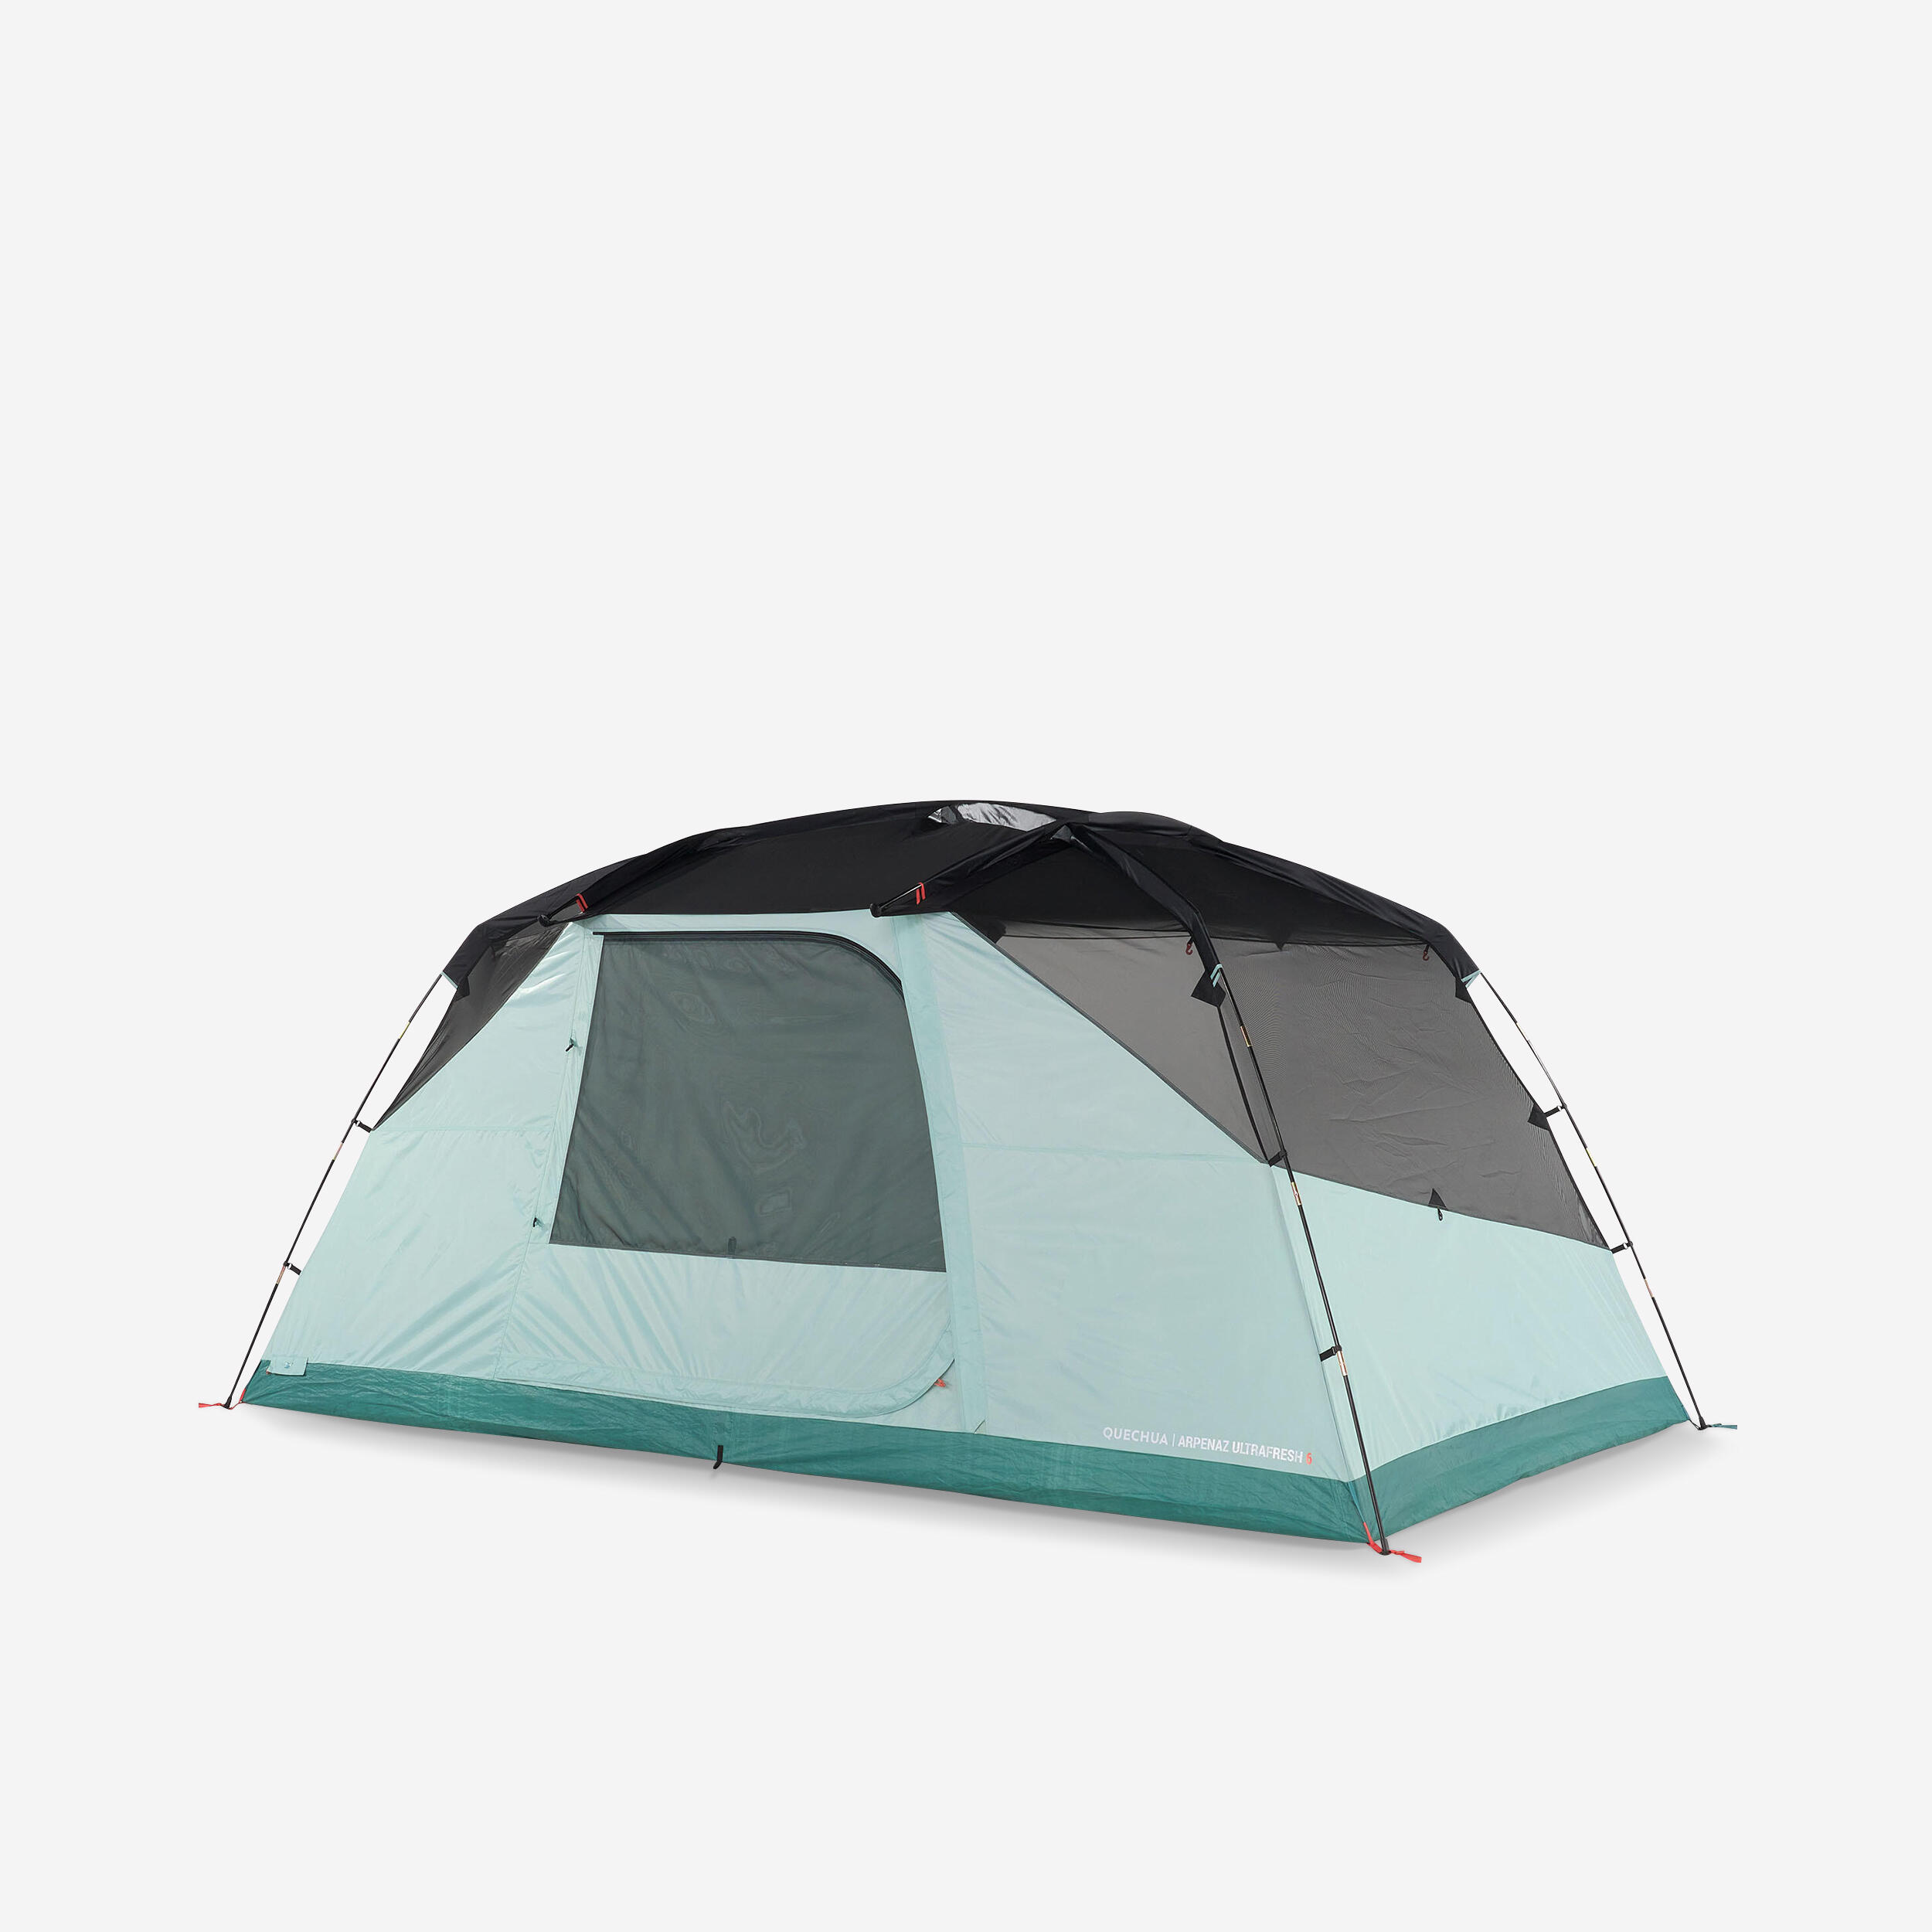 QUECHUA BEDROOM - SPARE PART FOR THE ARPENAZ 6 ULTRAFRESH TENT